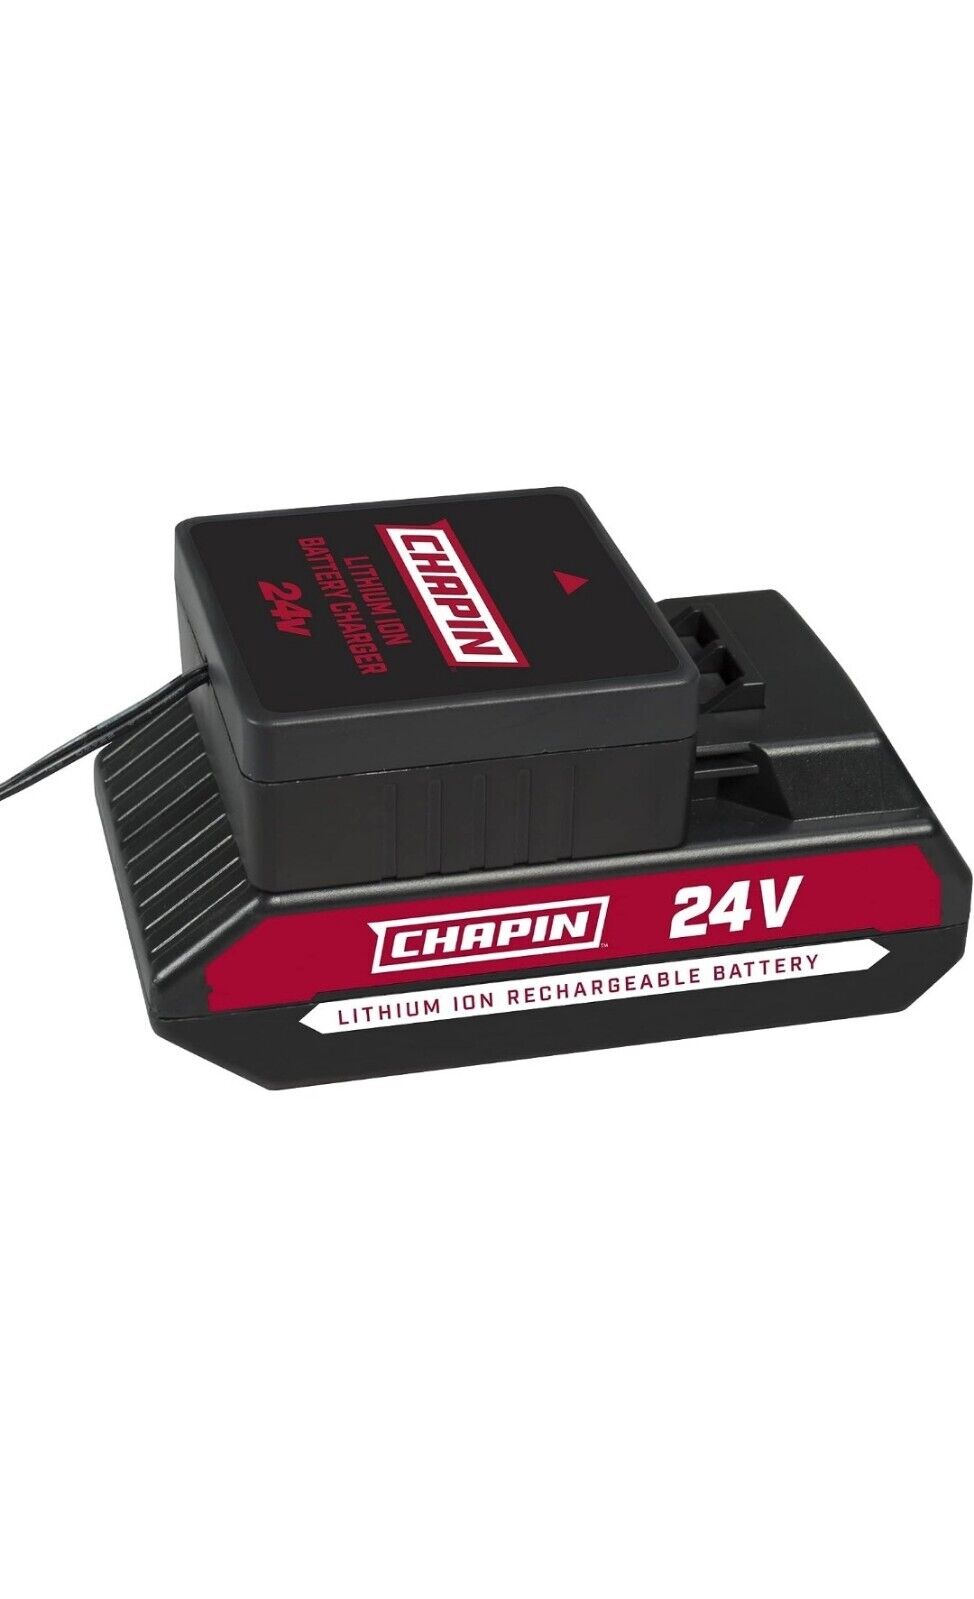 Chapin 6-8238 24-volt 24v 2.0Ah Lithium ION Rechargeable Battery